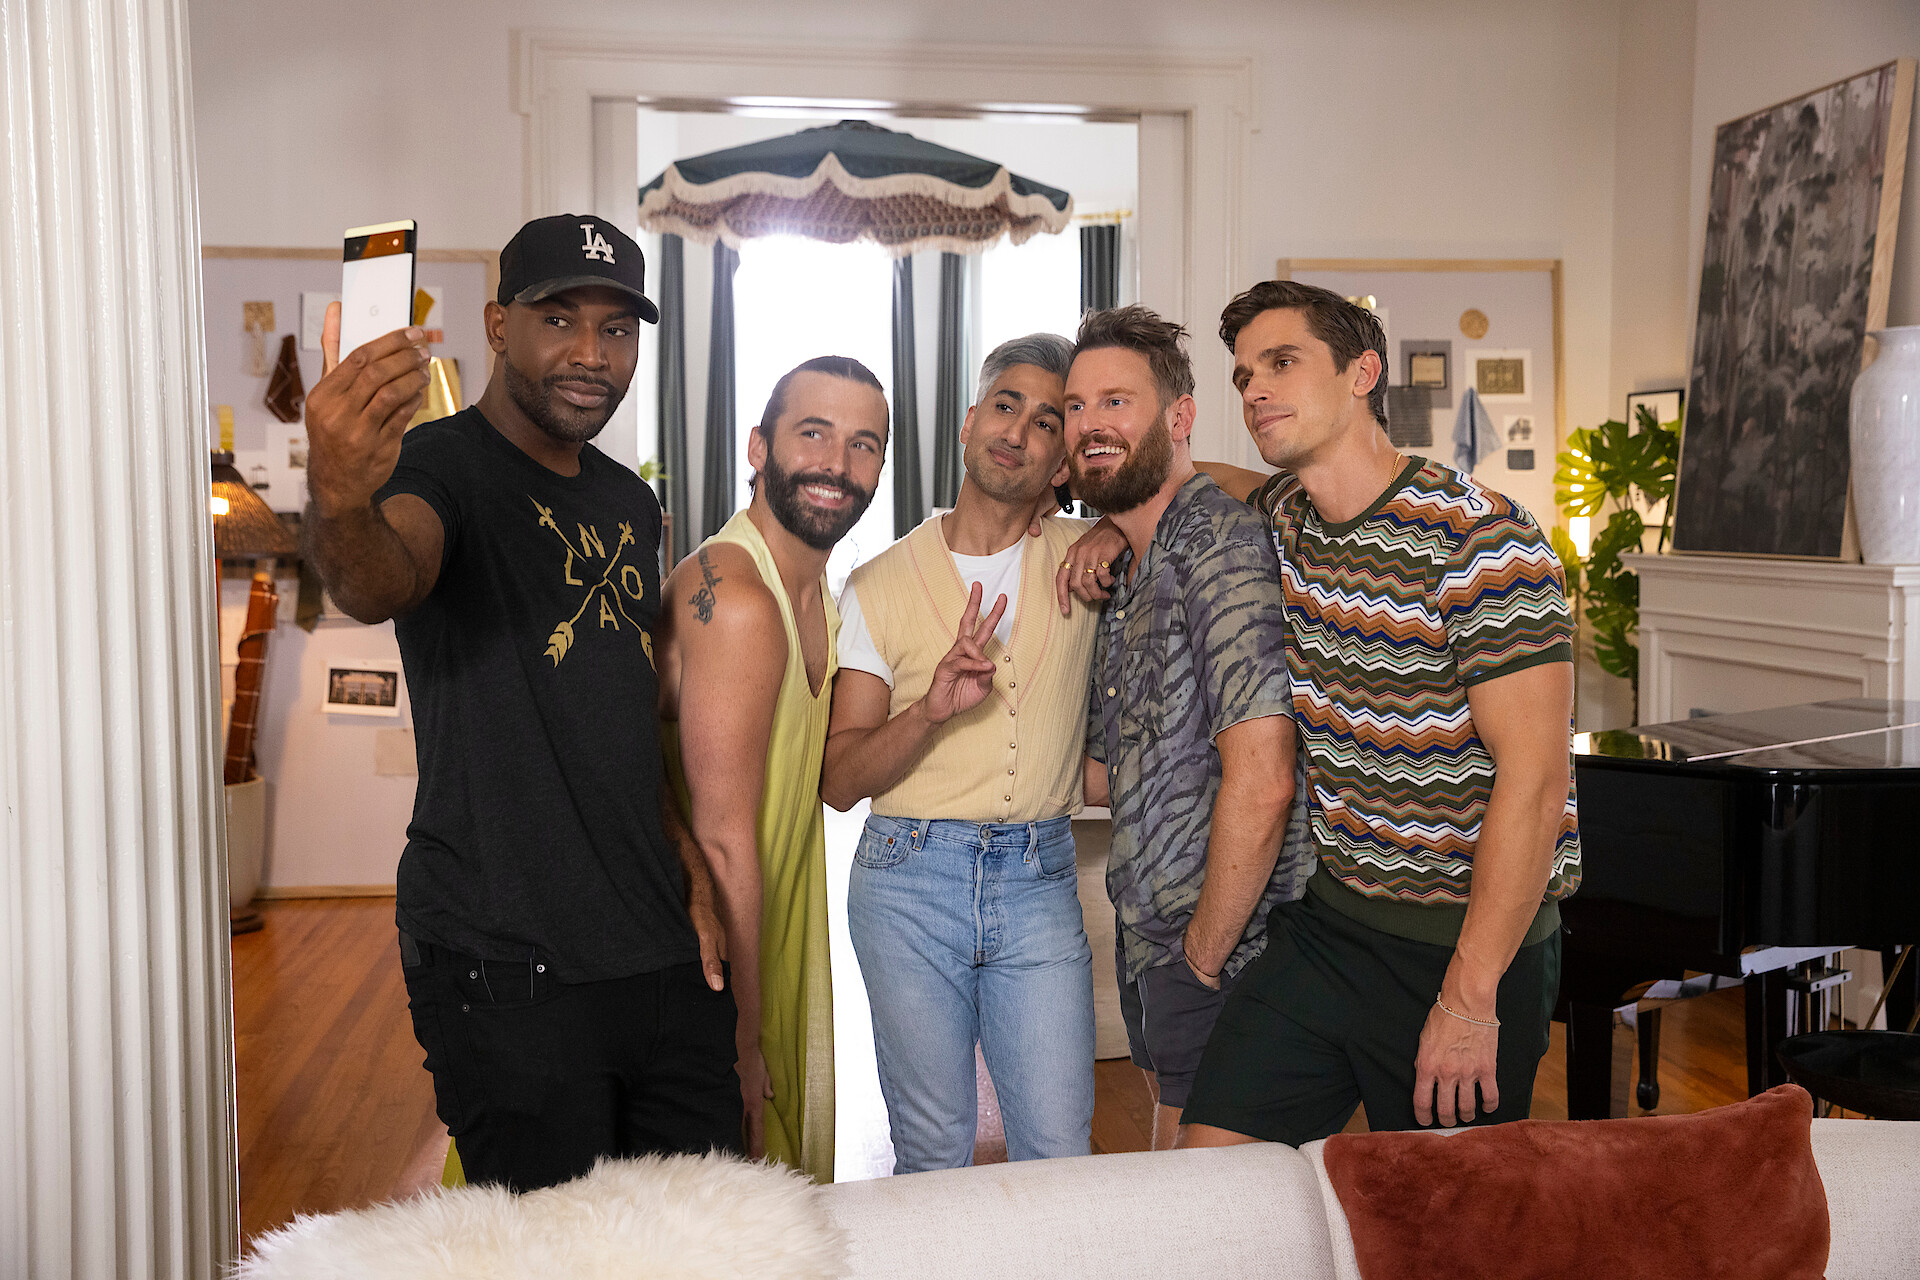 Meet The Steamy Queer Cast Of Netflix's Squid Game: The Challenge